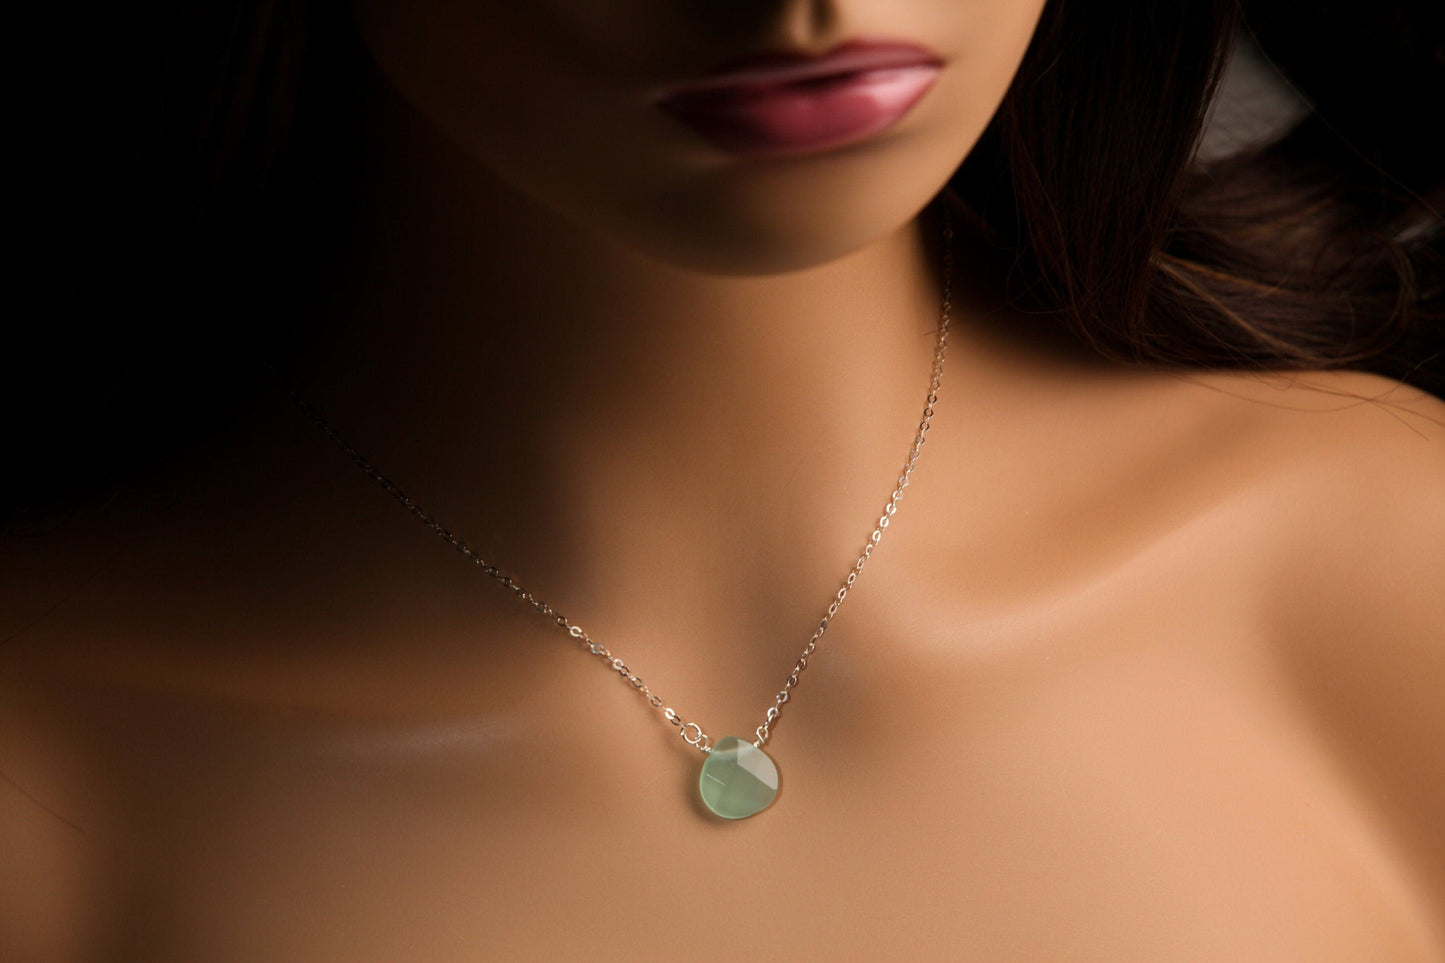 Aqua Chalcedony Faceted Heart Briolette Teardrop AAA Quality 13.5mm Cut Gems in 925 Sterling Silver Necklace valentines gift